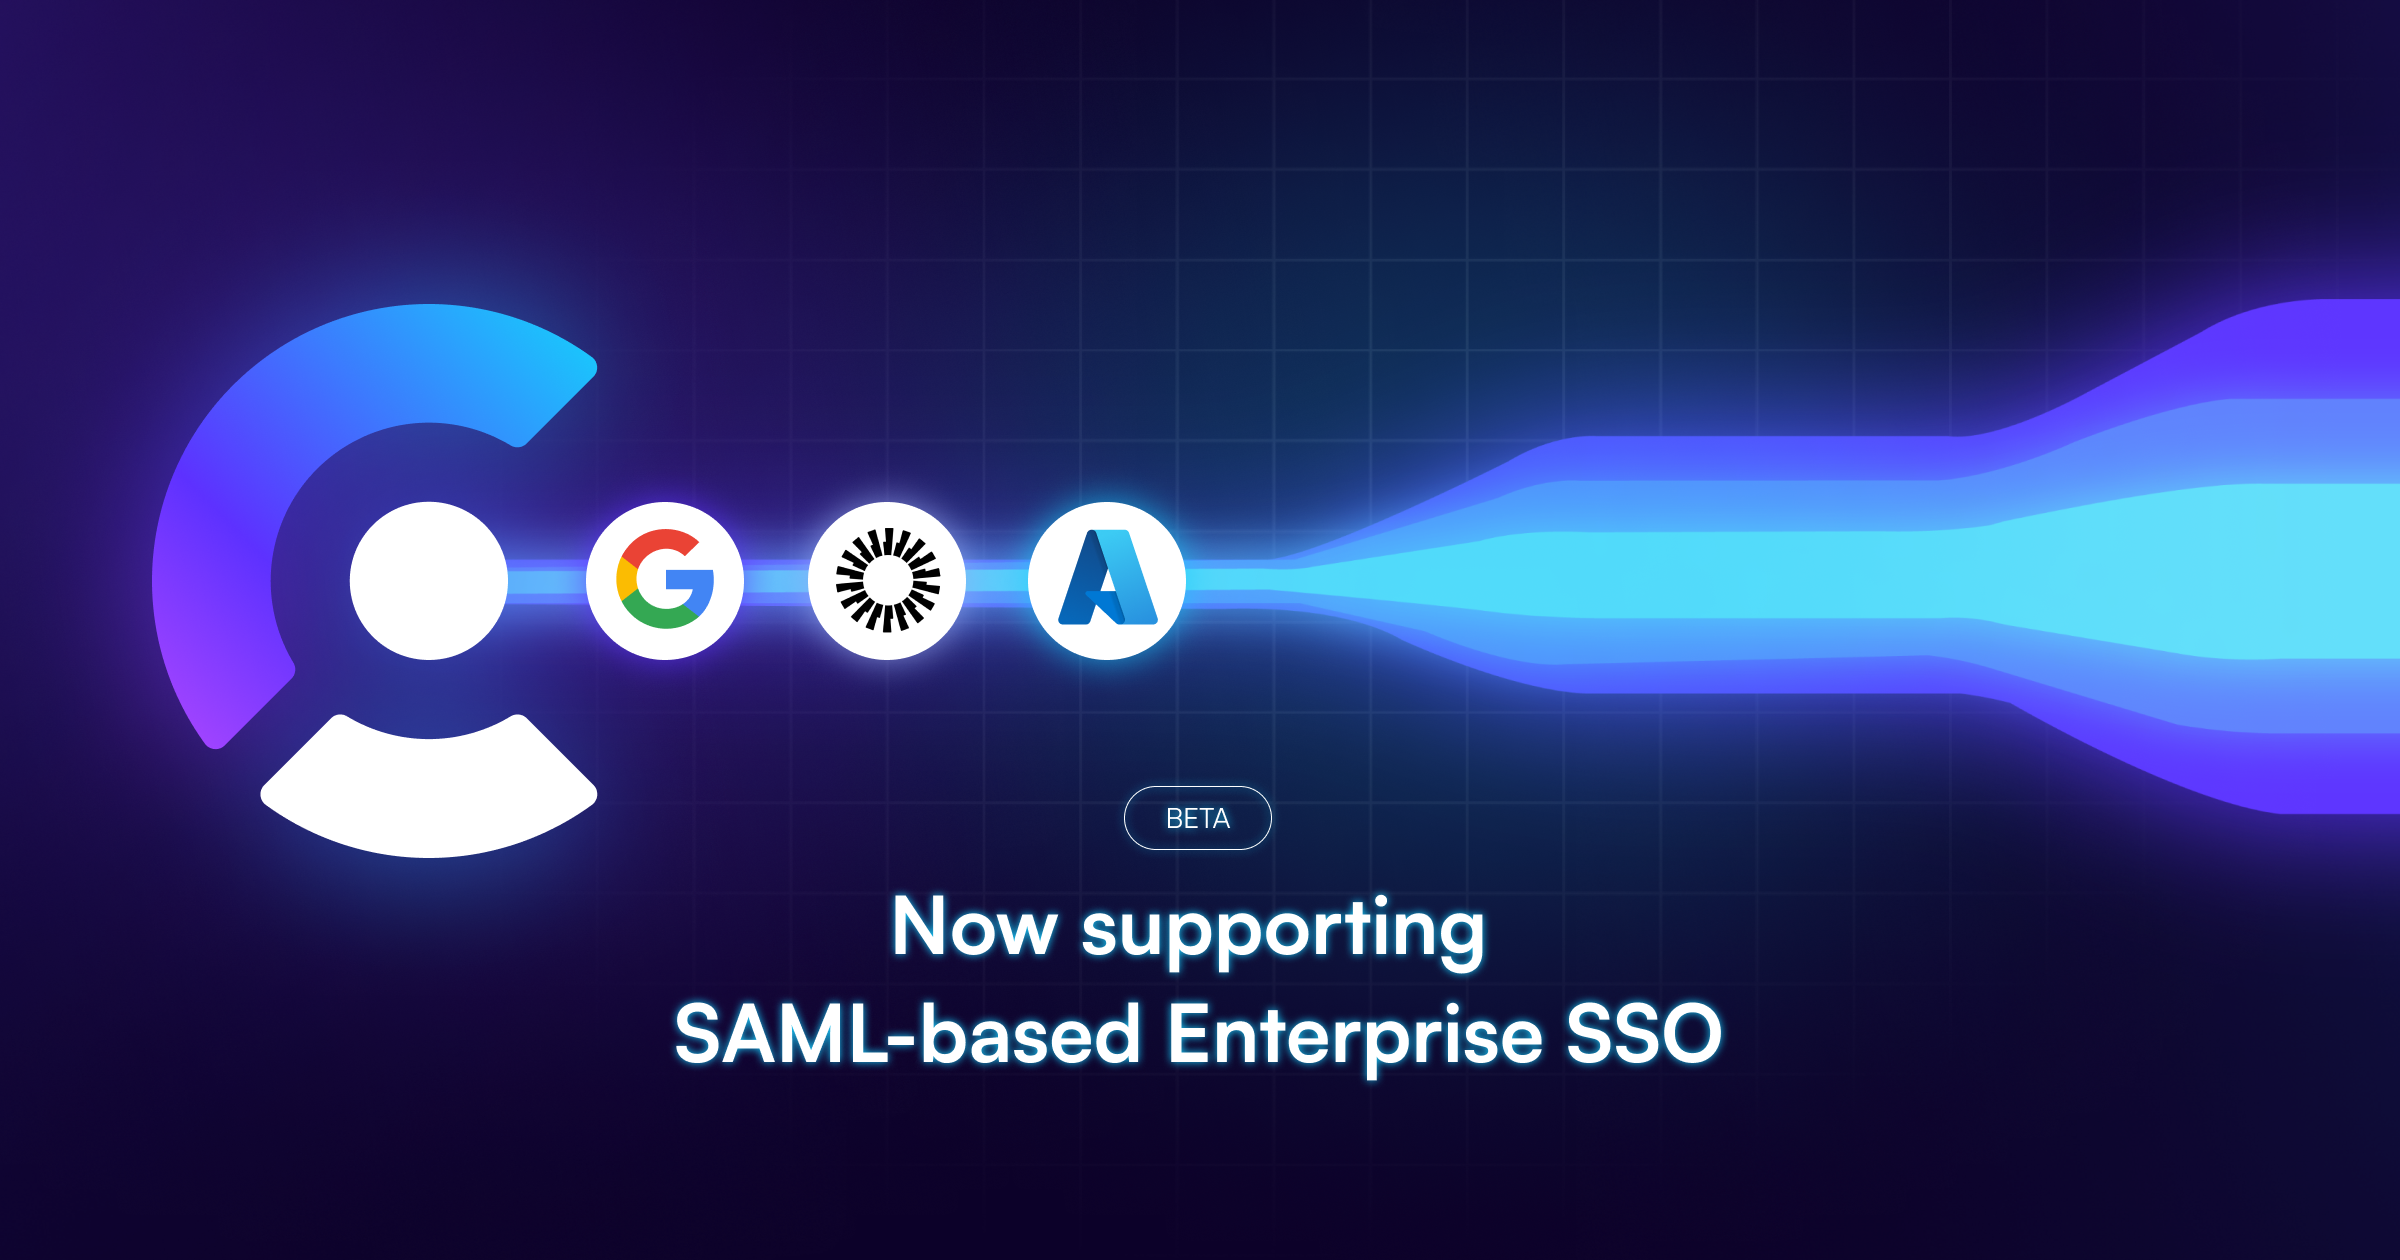 SAML is now available in public beta